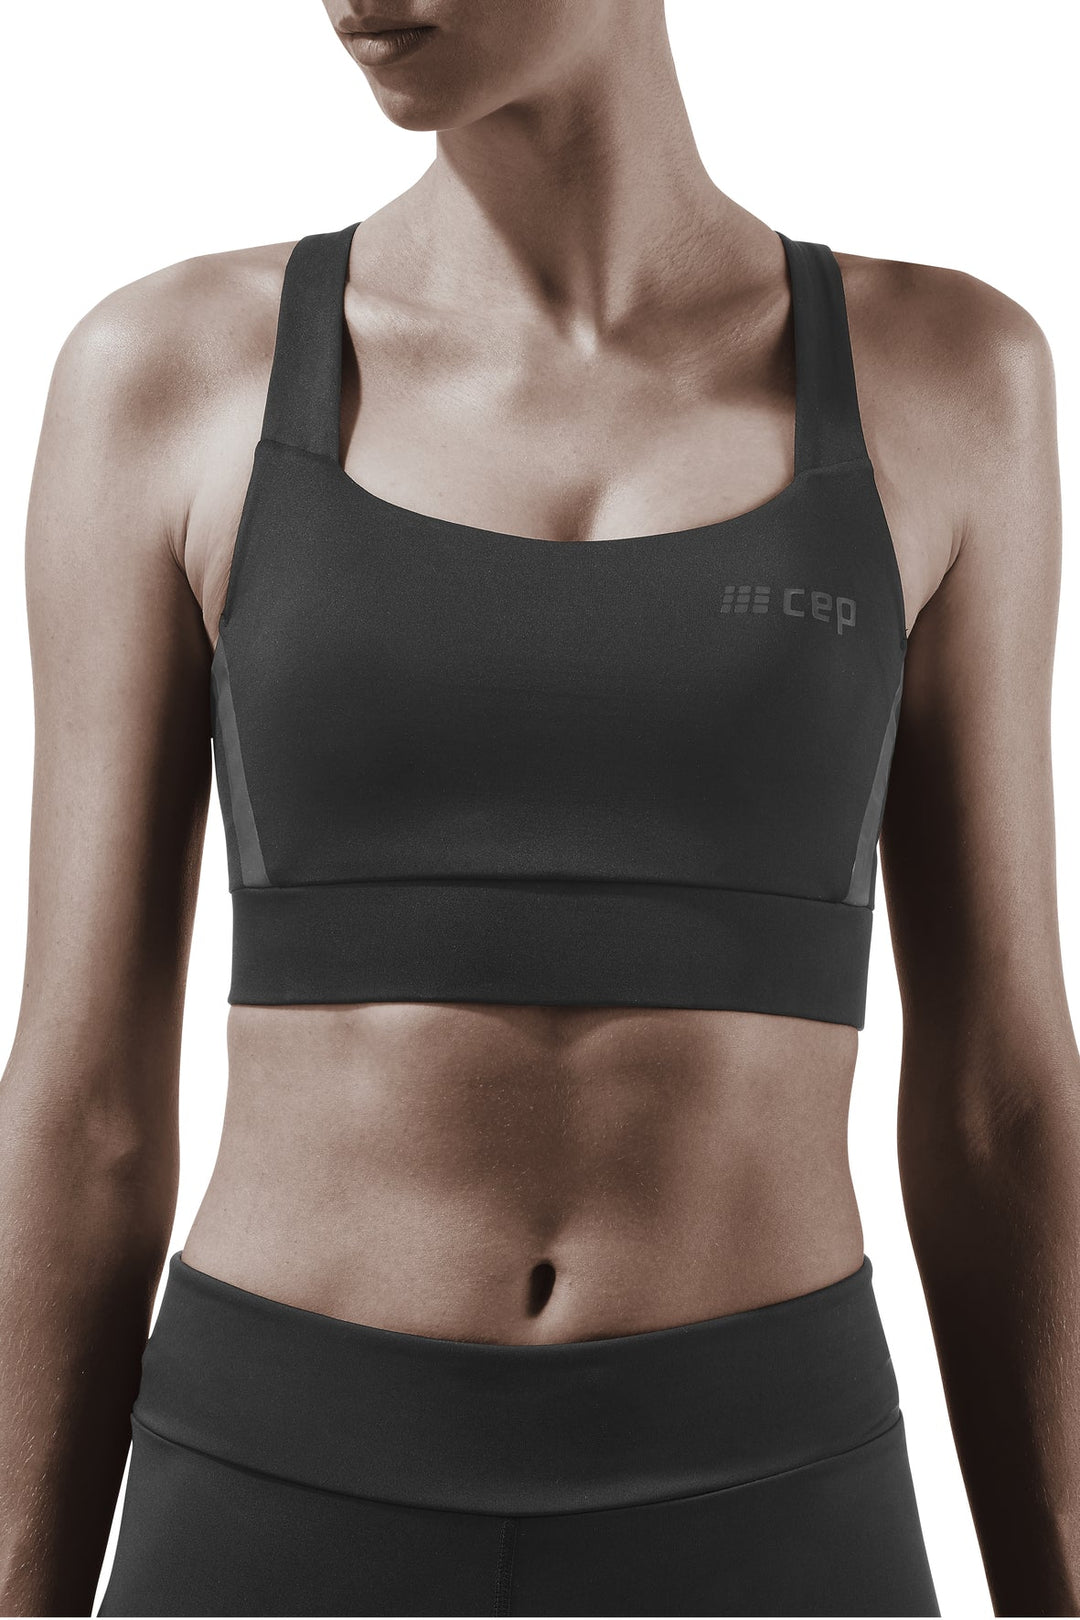 Post Surgical Comfort Compression Sports Bra: White Dragonfly - XS at   Women's Clothing store